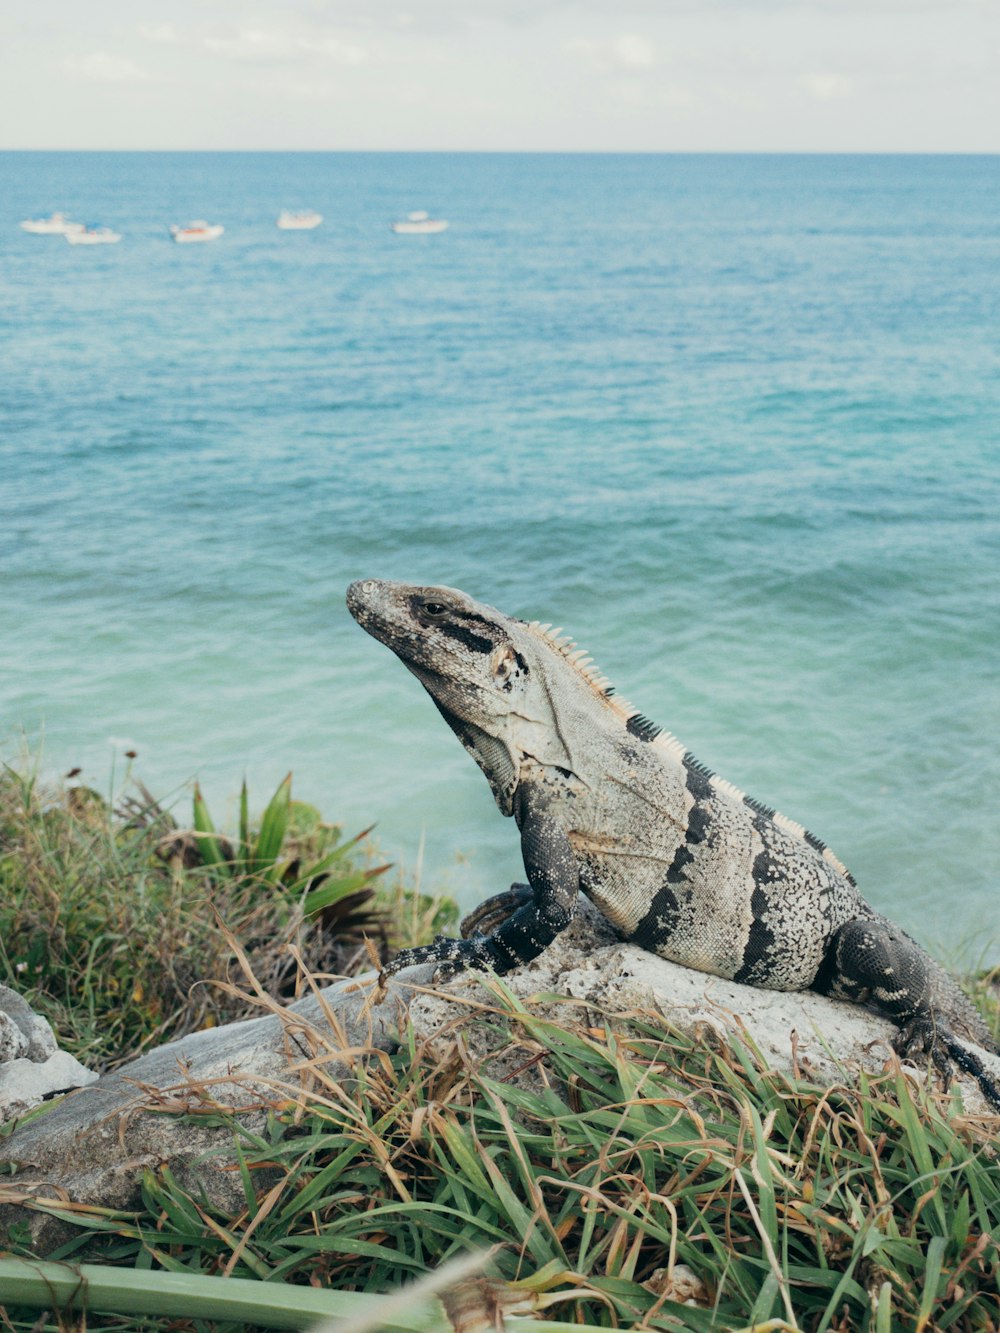 a large lizard sitting on top of a rock near the ocean